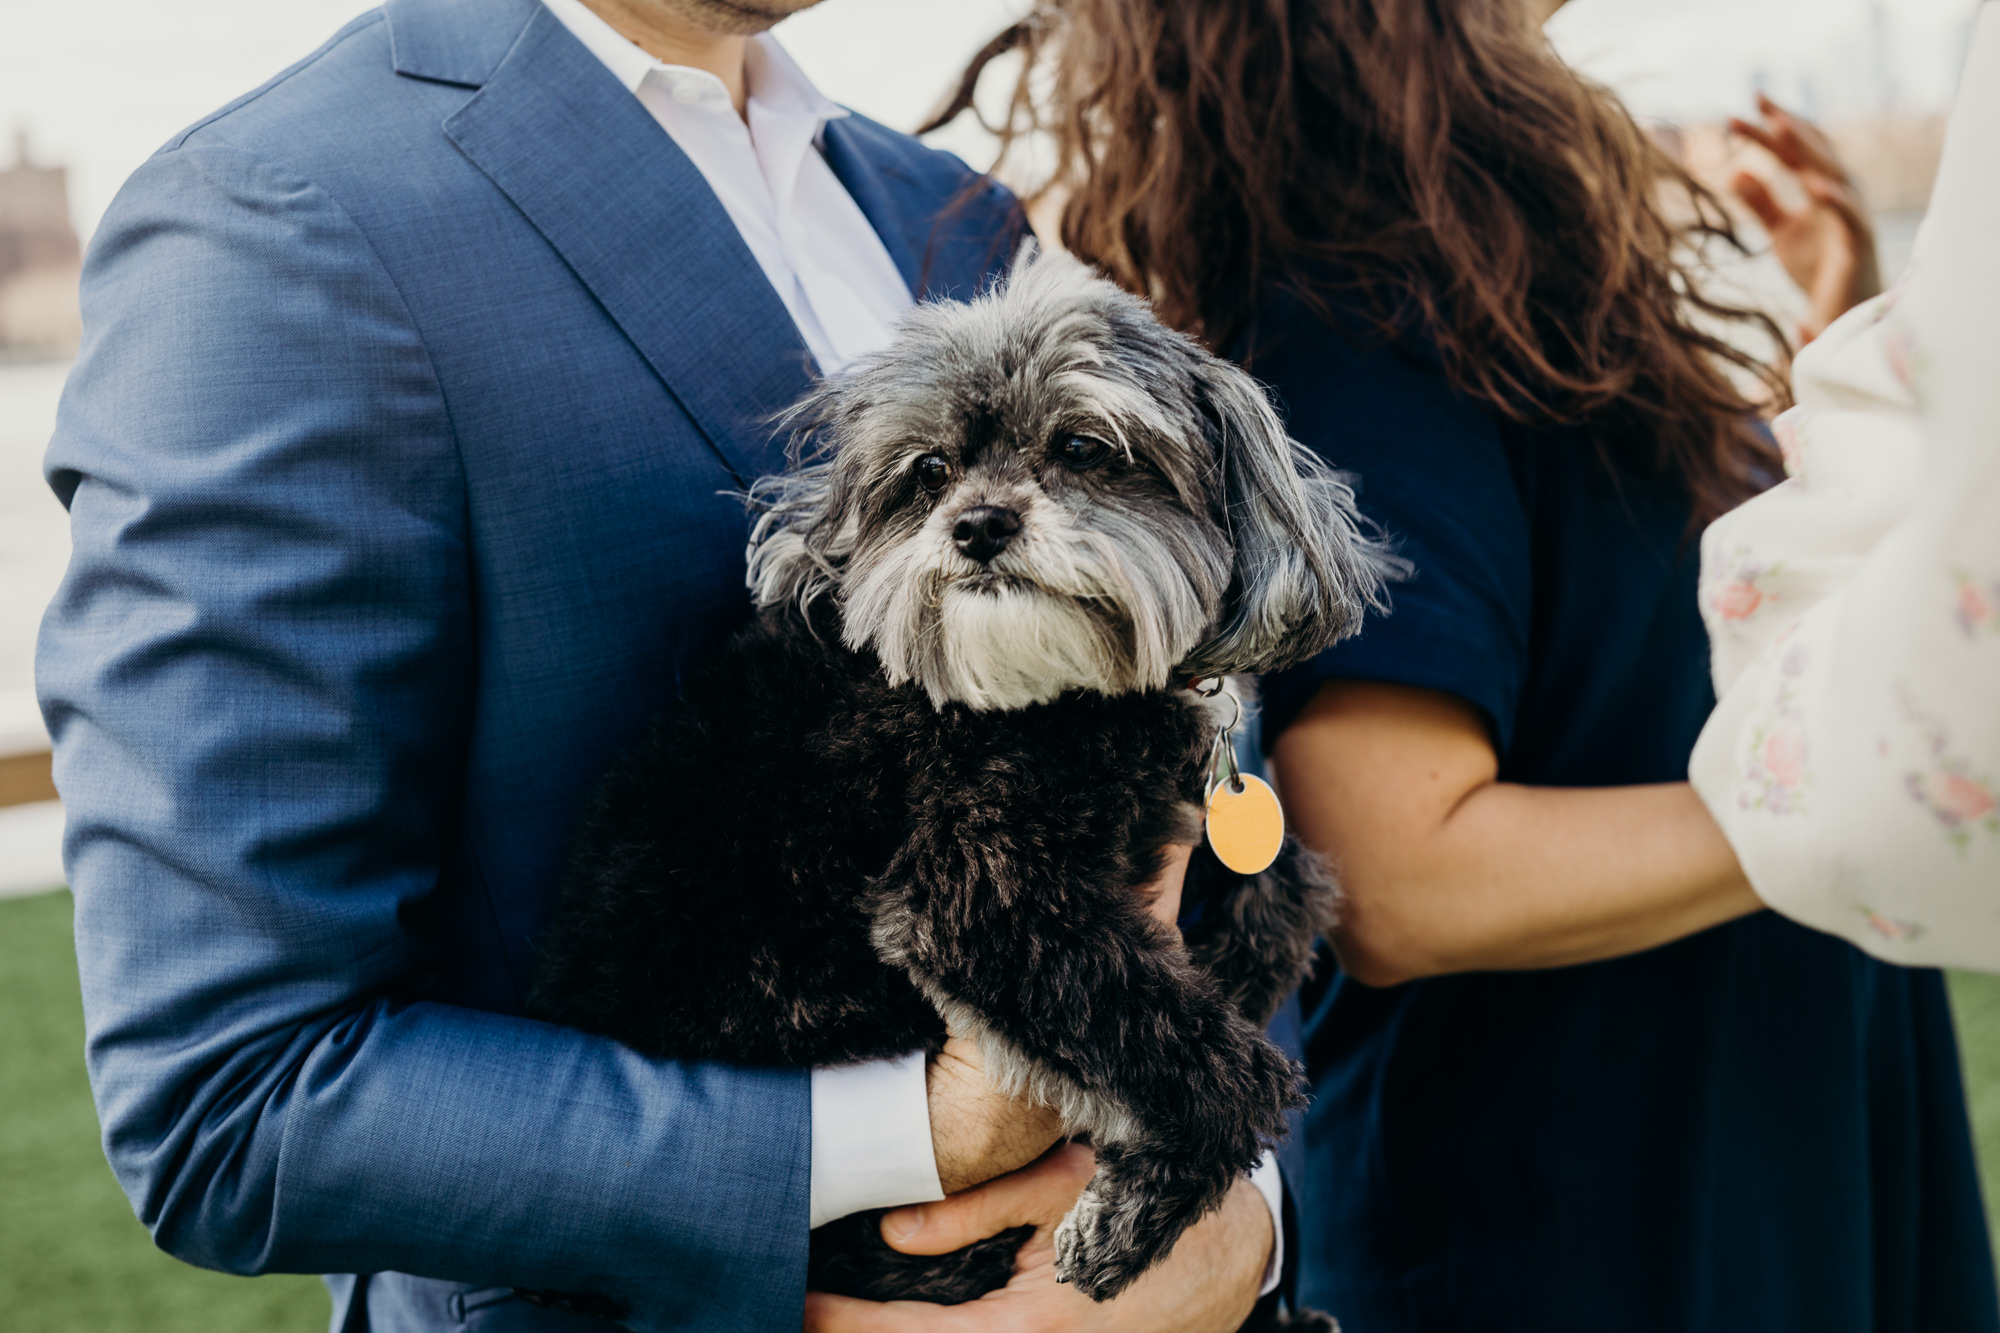 a portrait of a dog at a wedding ceremony at domino park in brooklyn, ny